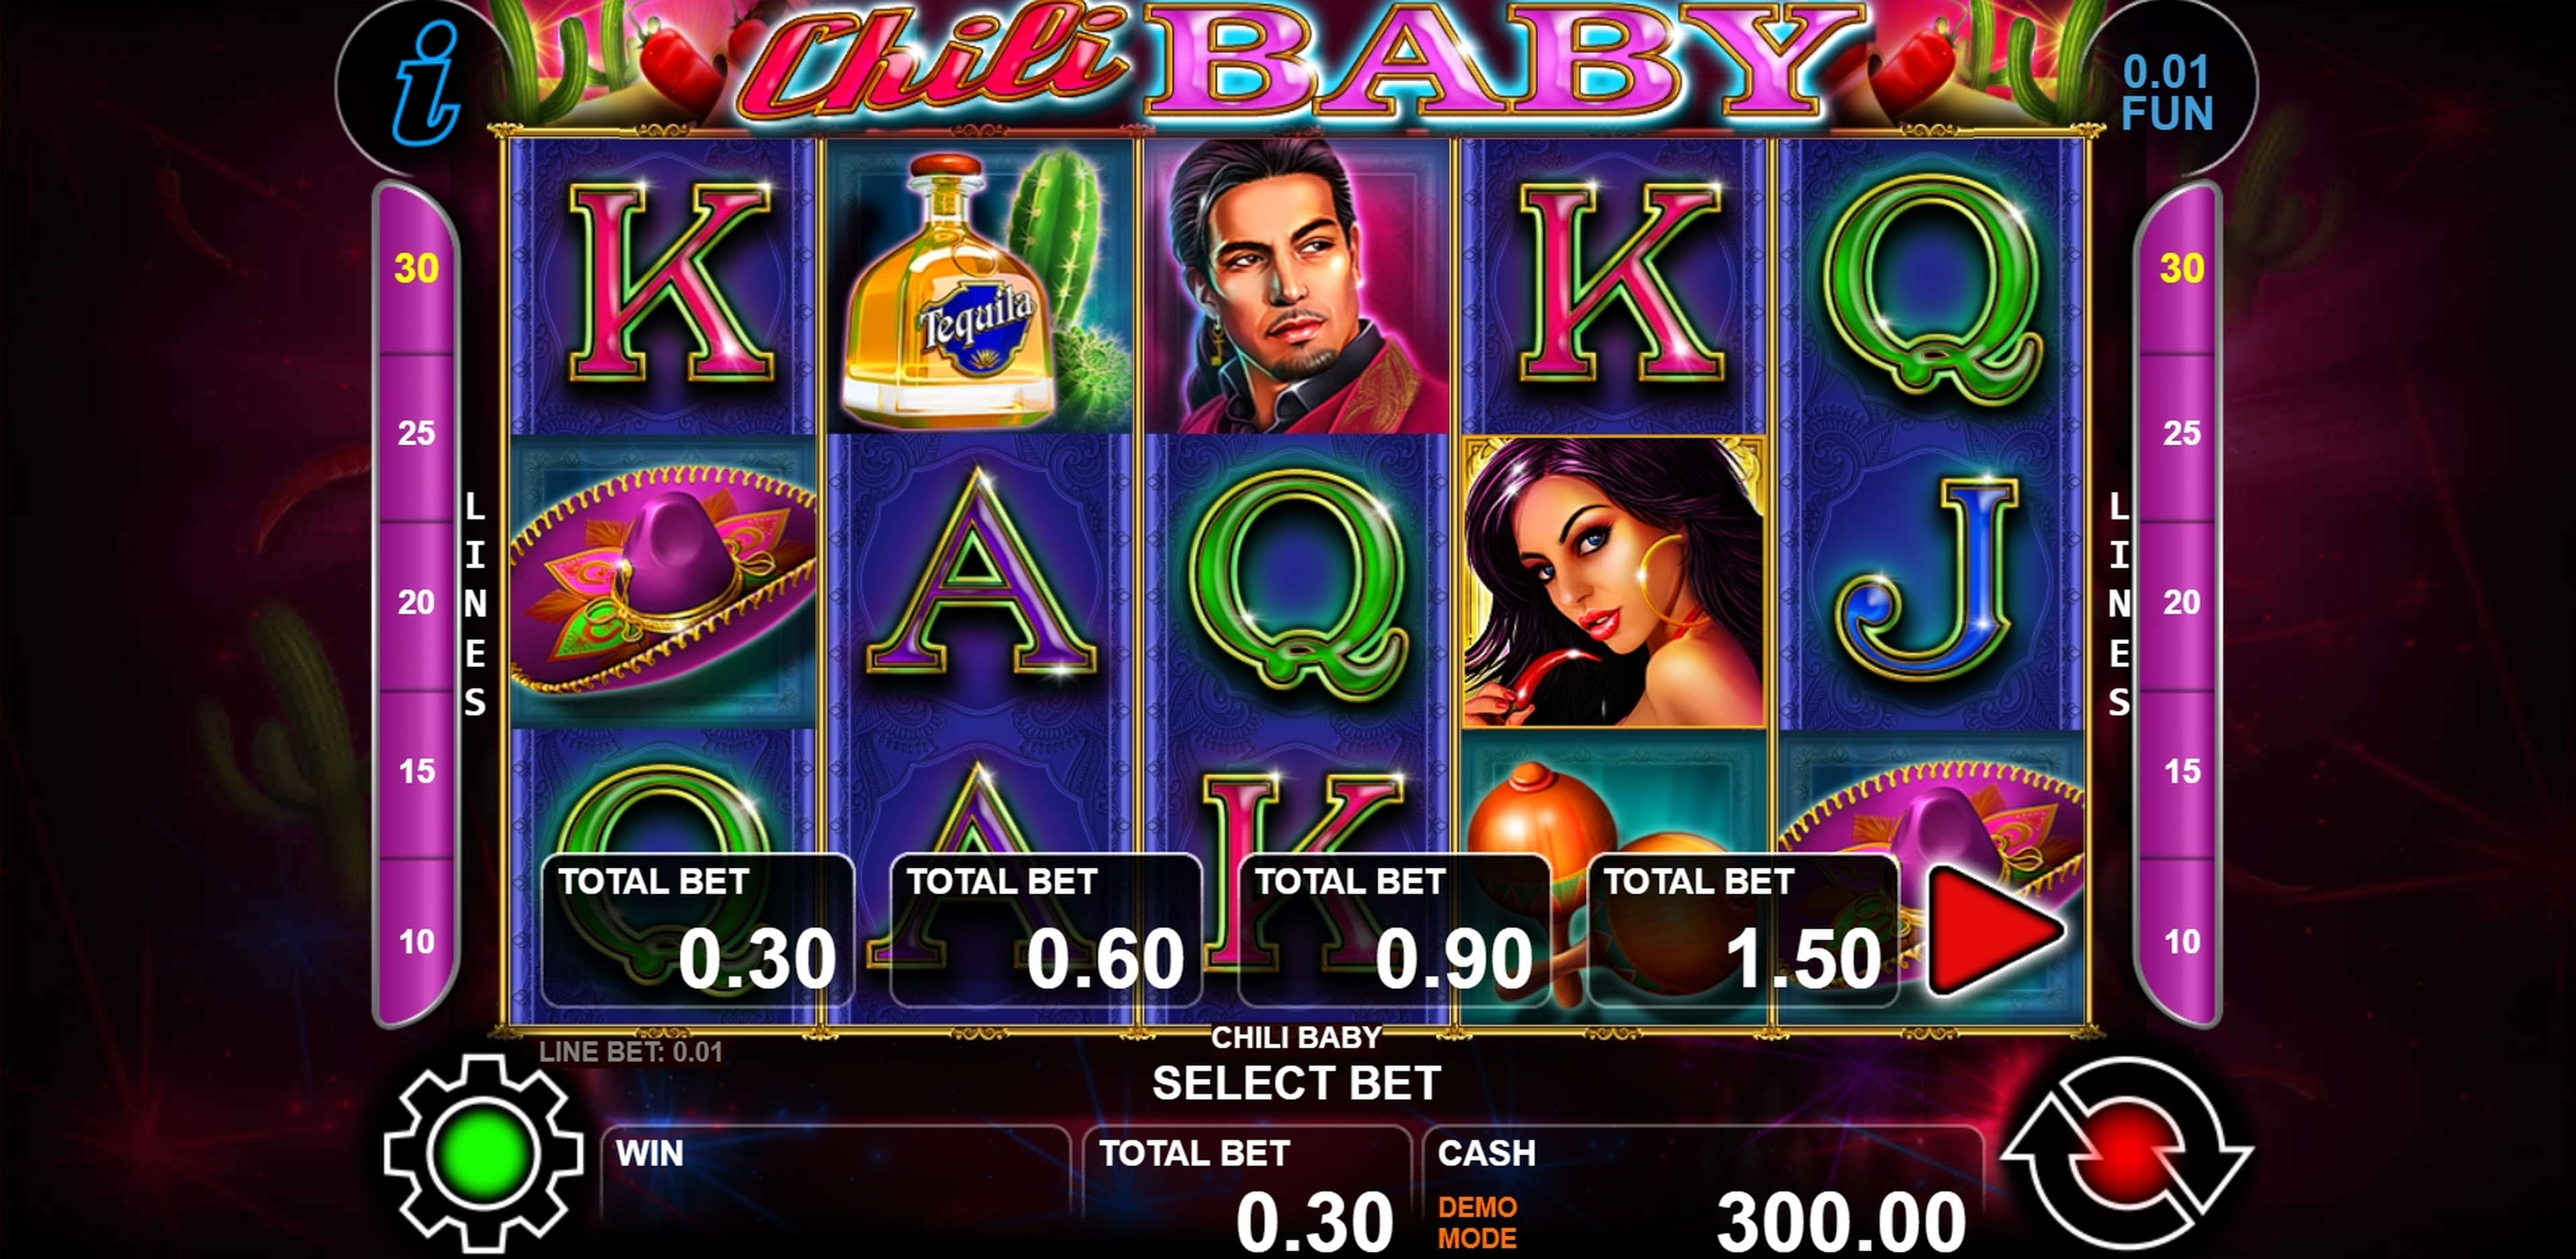 Reels in Chili Baby Slot Game by casino technology